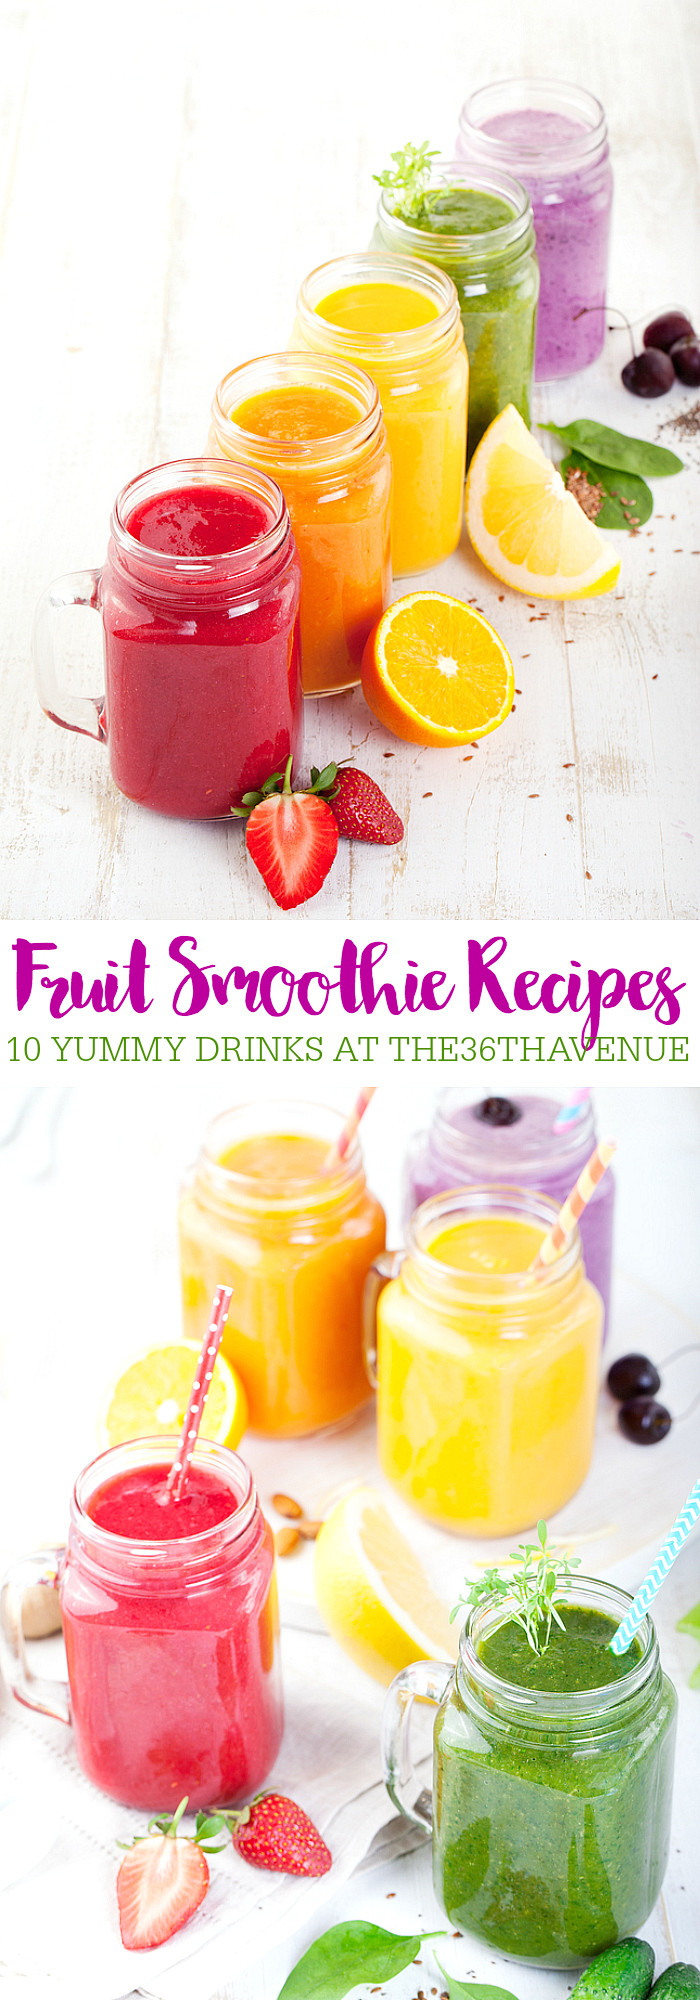 Sweet Smoothies Recipes
 Smoothie Recipes Fresh Fruit Drinks The 36th AVENUE